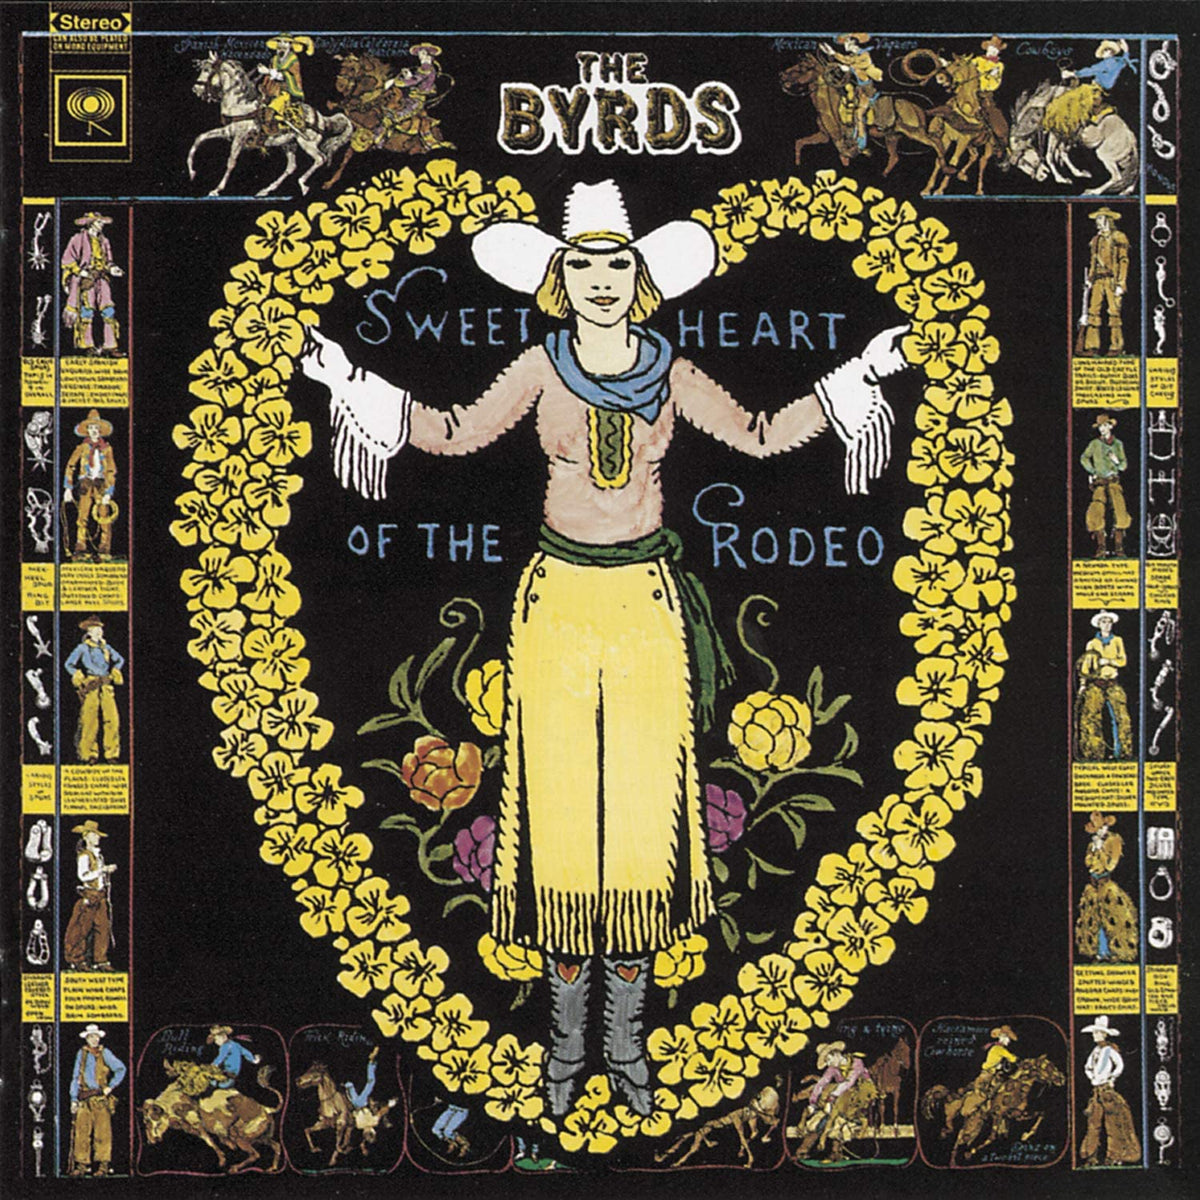 The Byrds – Sweetheart Of The Rodeo (LP)